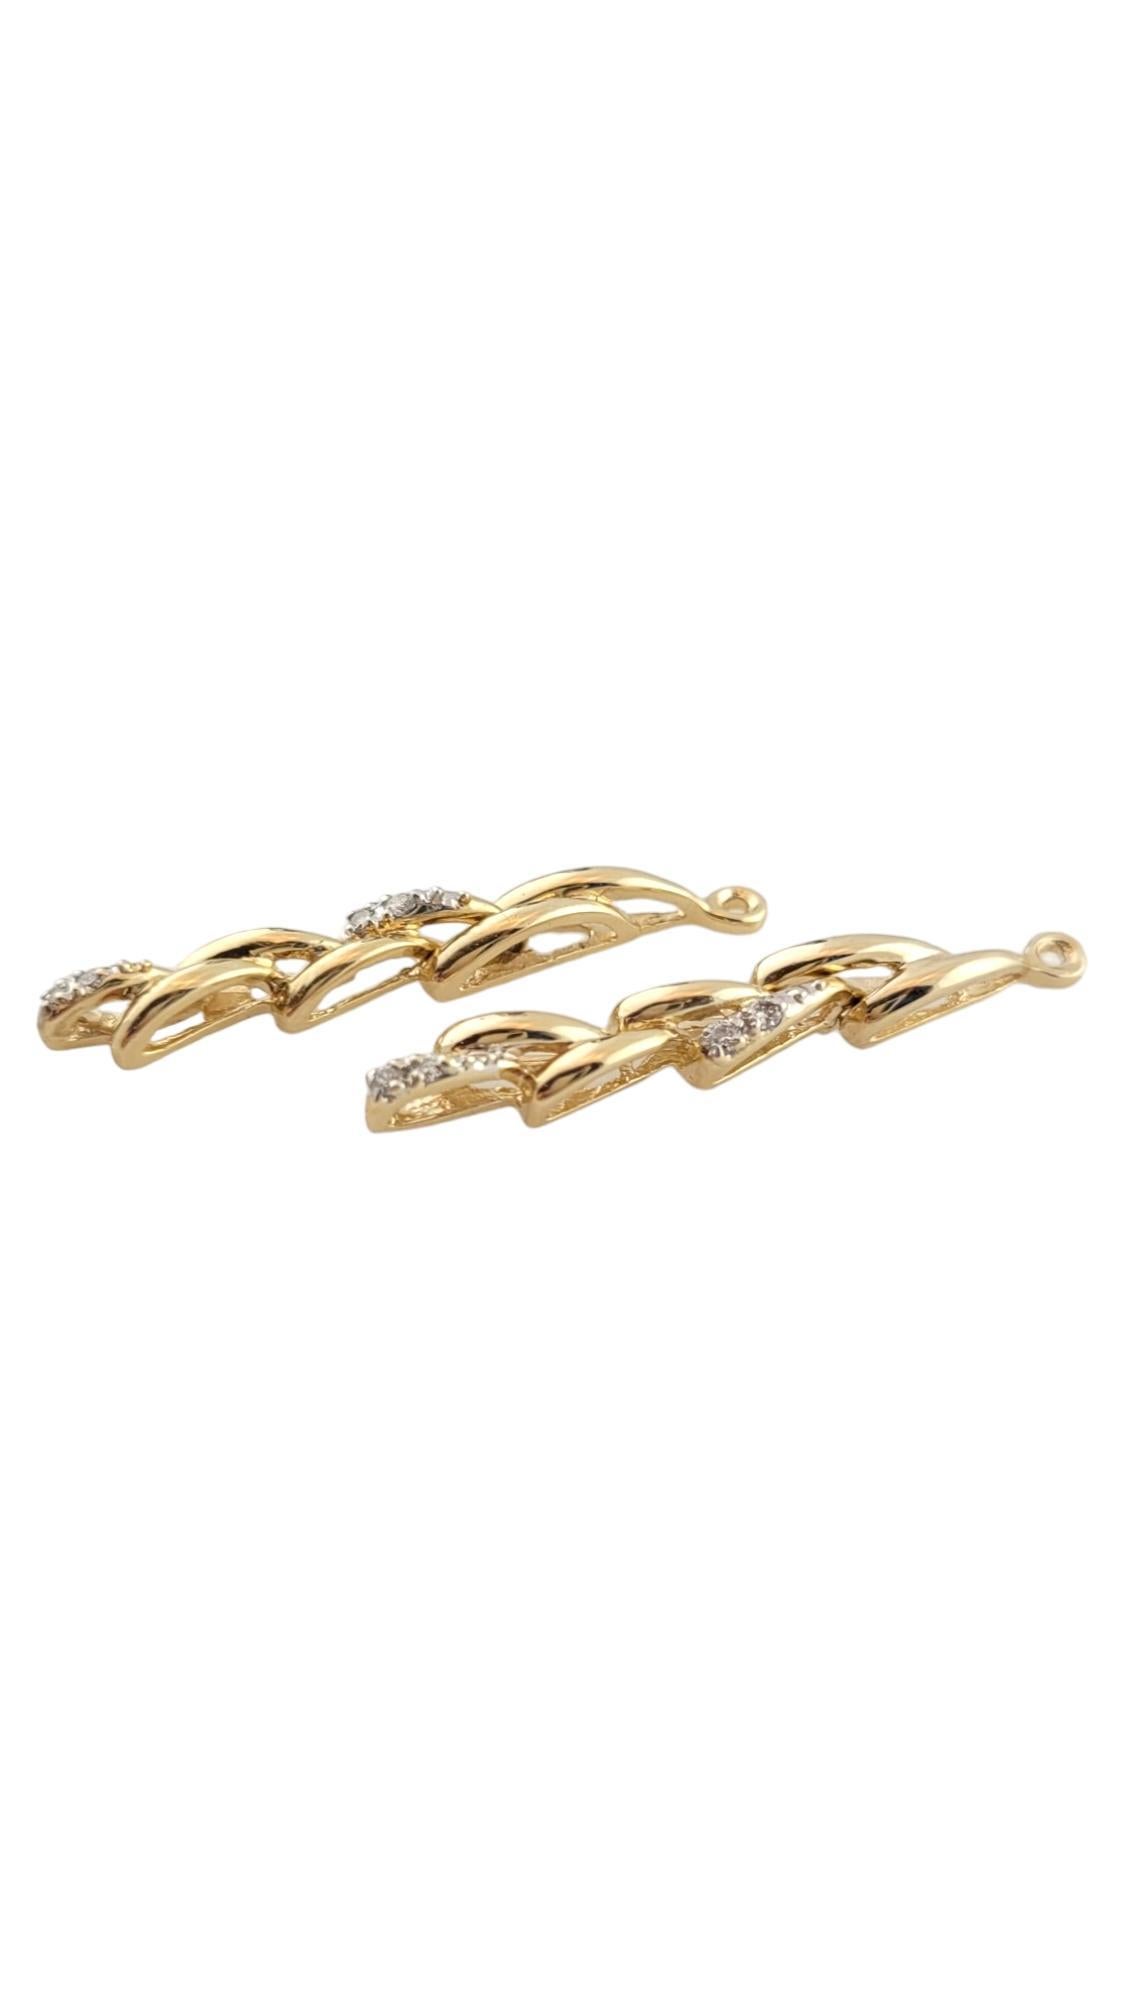 Vintage 14K Yellow Gold Diamond Earring Enhancers

This gorgeous set of earring enhancers are crafted from 14K yellow gold and feature 8 sparkling round brilliant cut diamonds!

Approximate total diamond weight: .05 cts

Diamond color: G

Diamond